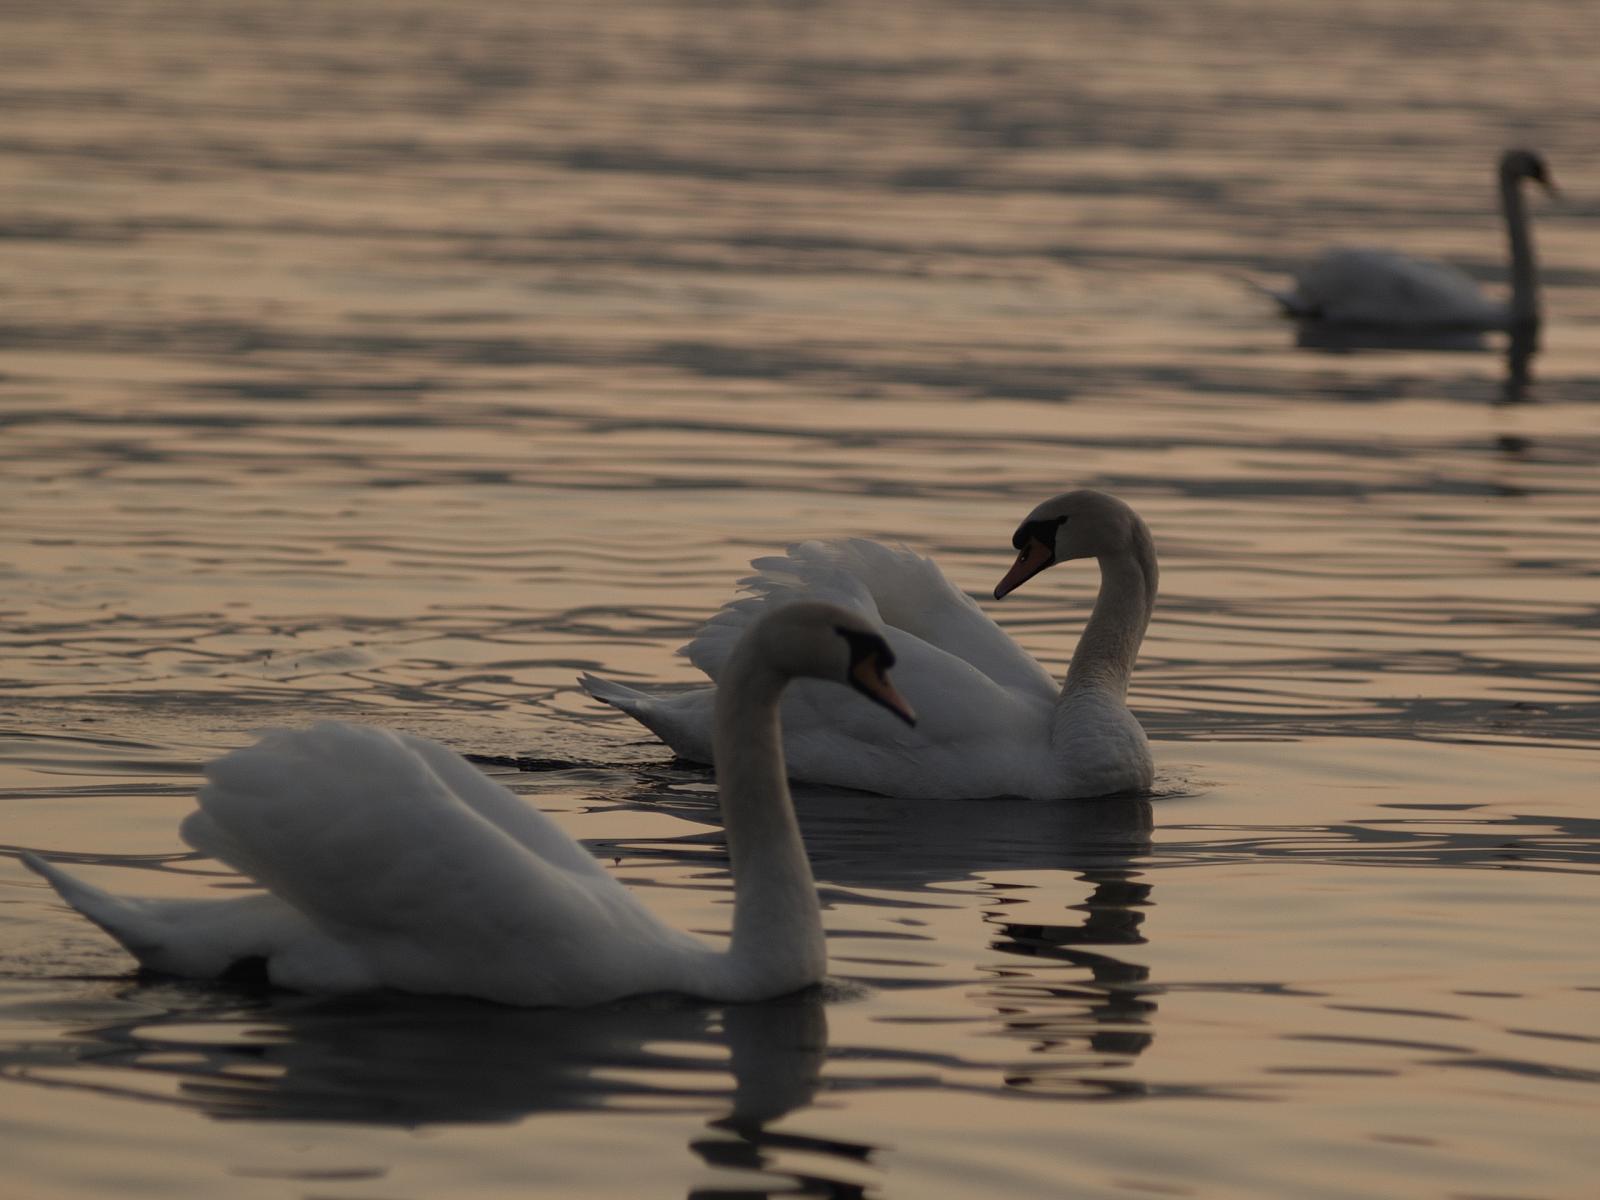 the two swans are swimming side by side